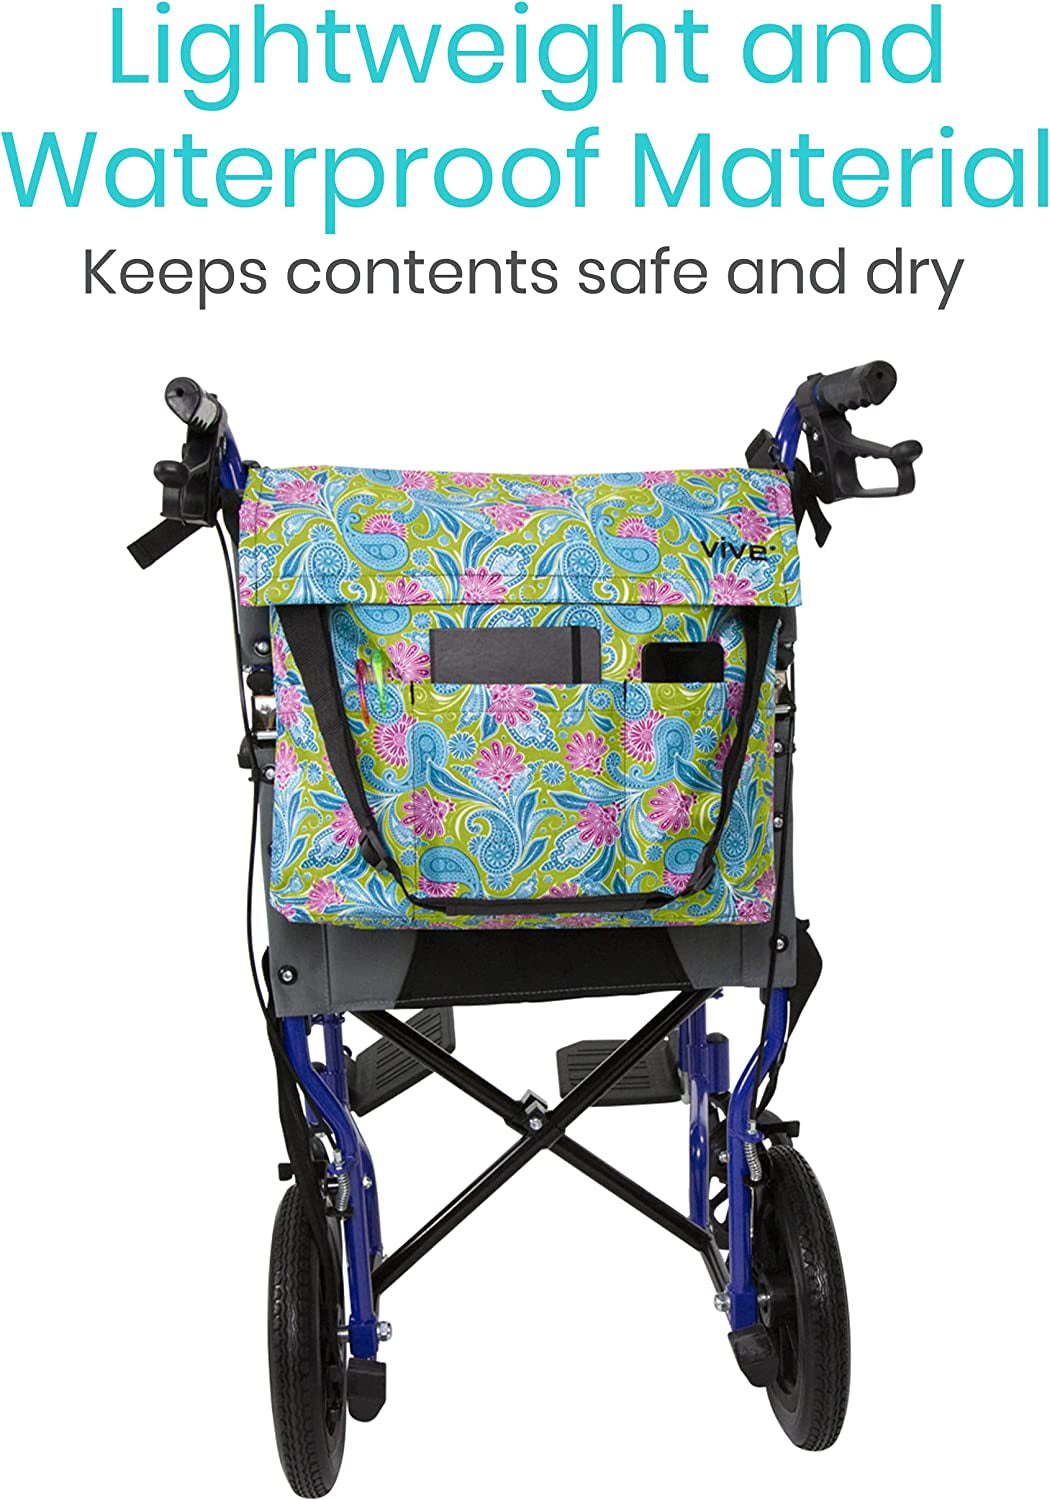 XL Wheelchair Bag - Waterproof, Scratch-Resistant, Double-Stitched, Machine Washable Accessory for Adults, Seniors, 15 Colors - Storage Walker Backpack to Hang on Back of Wheel Chair